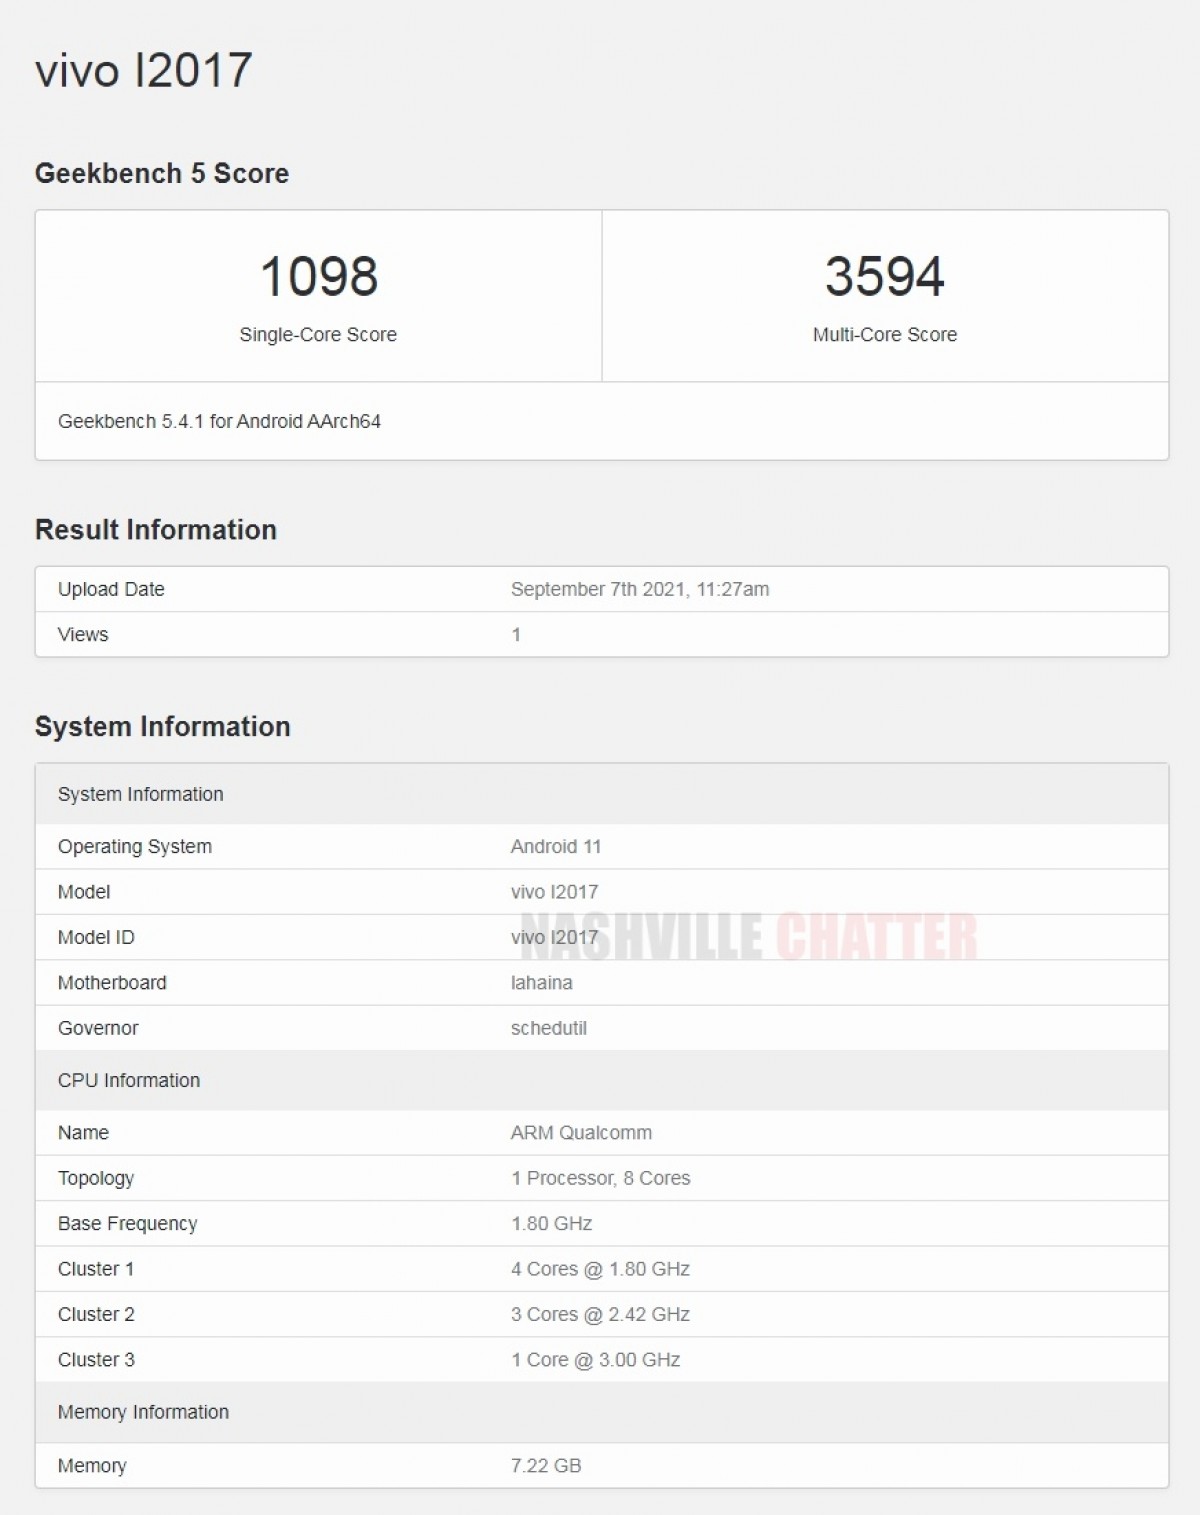 The Indian version of iQOO 8 Pro appears on Geekbench